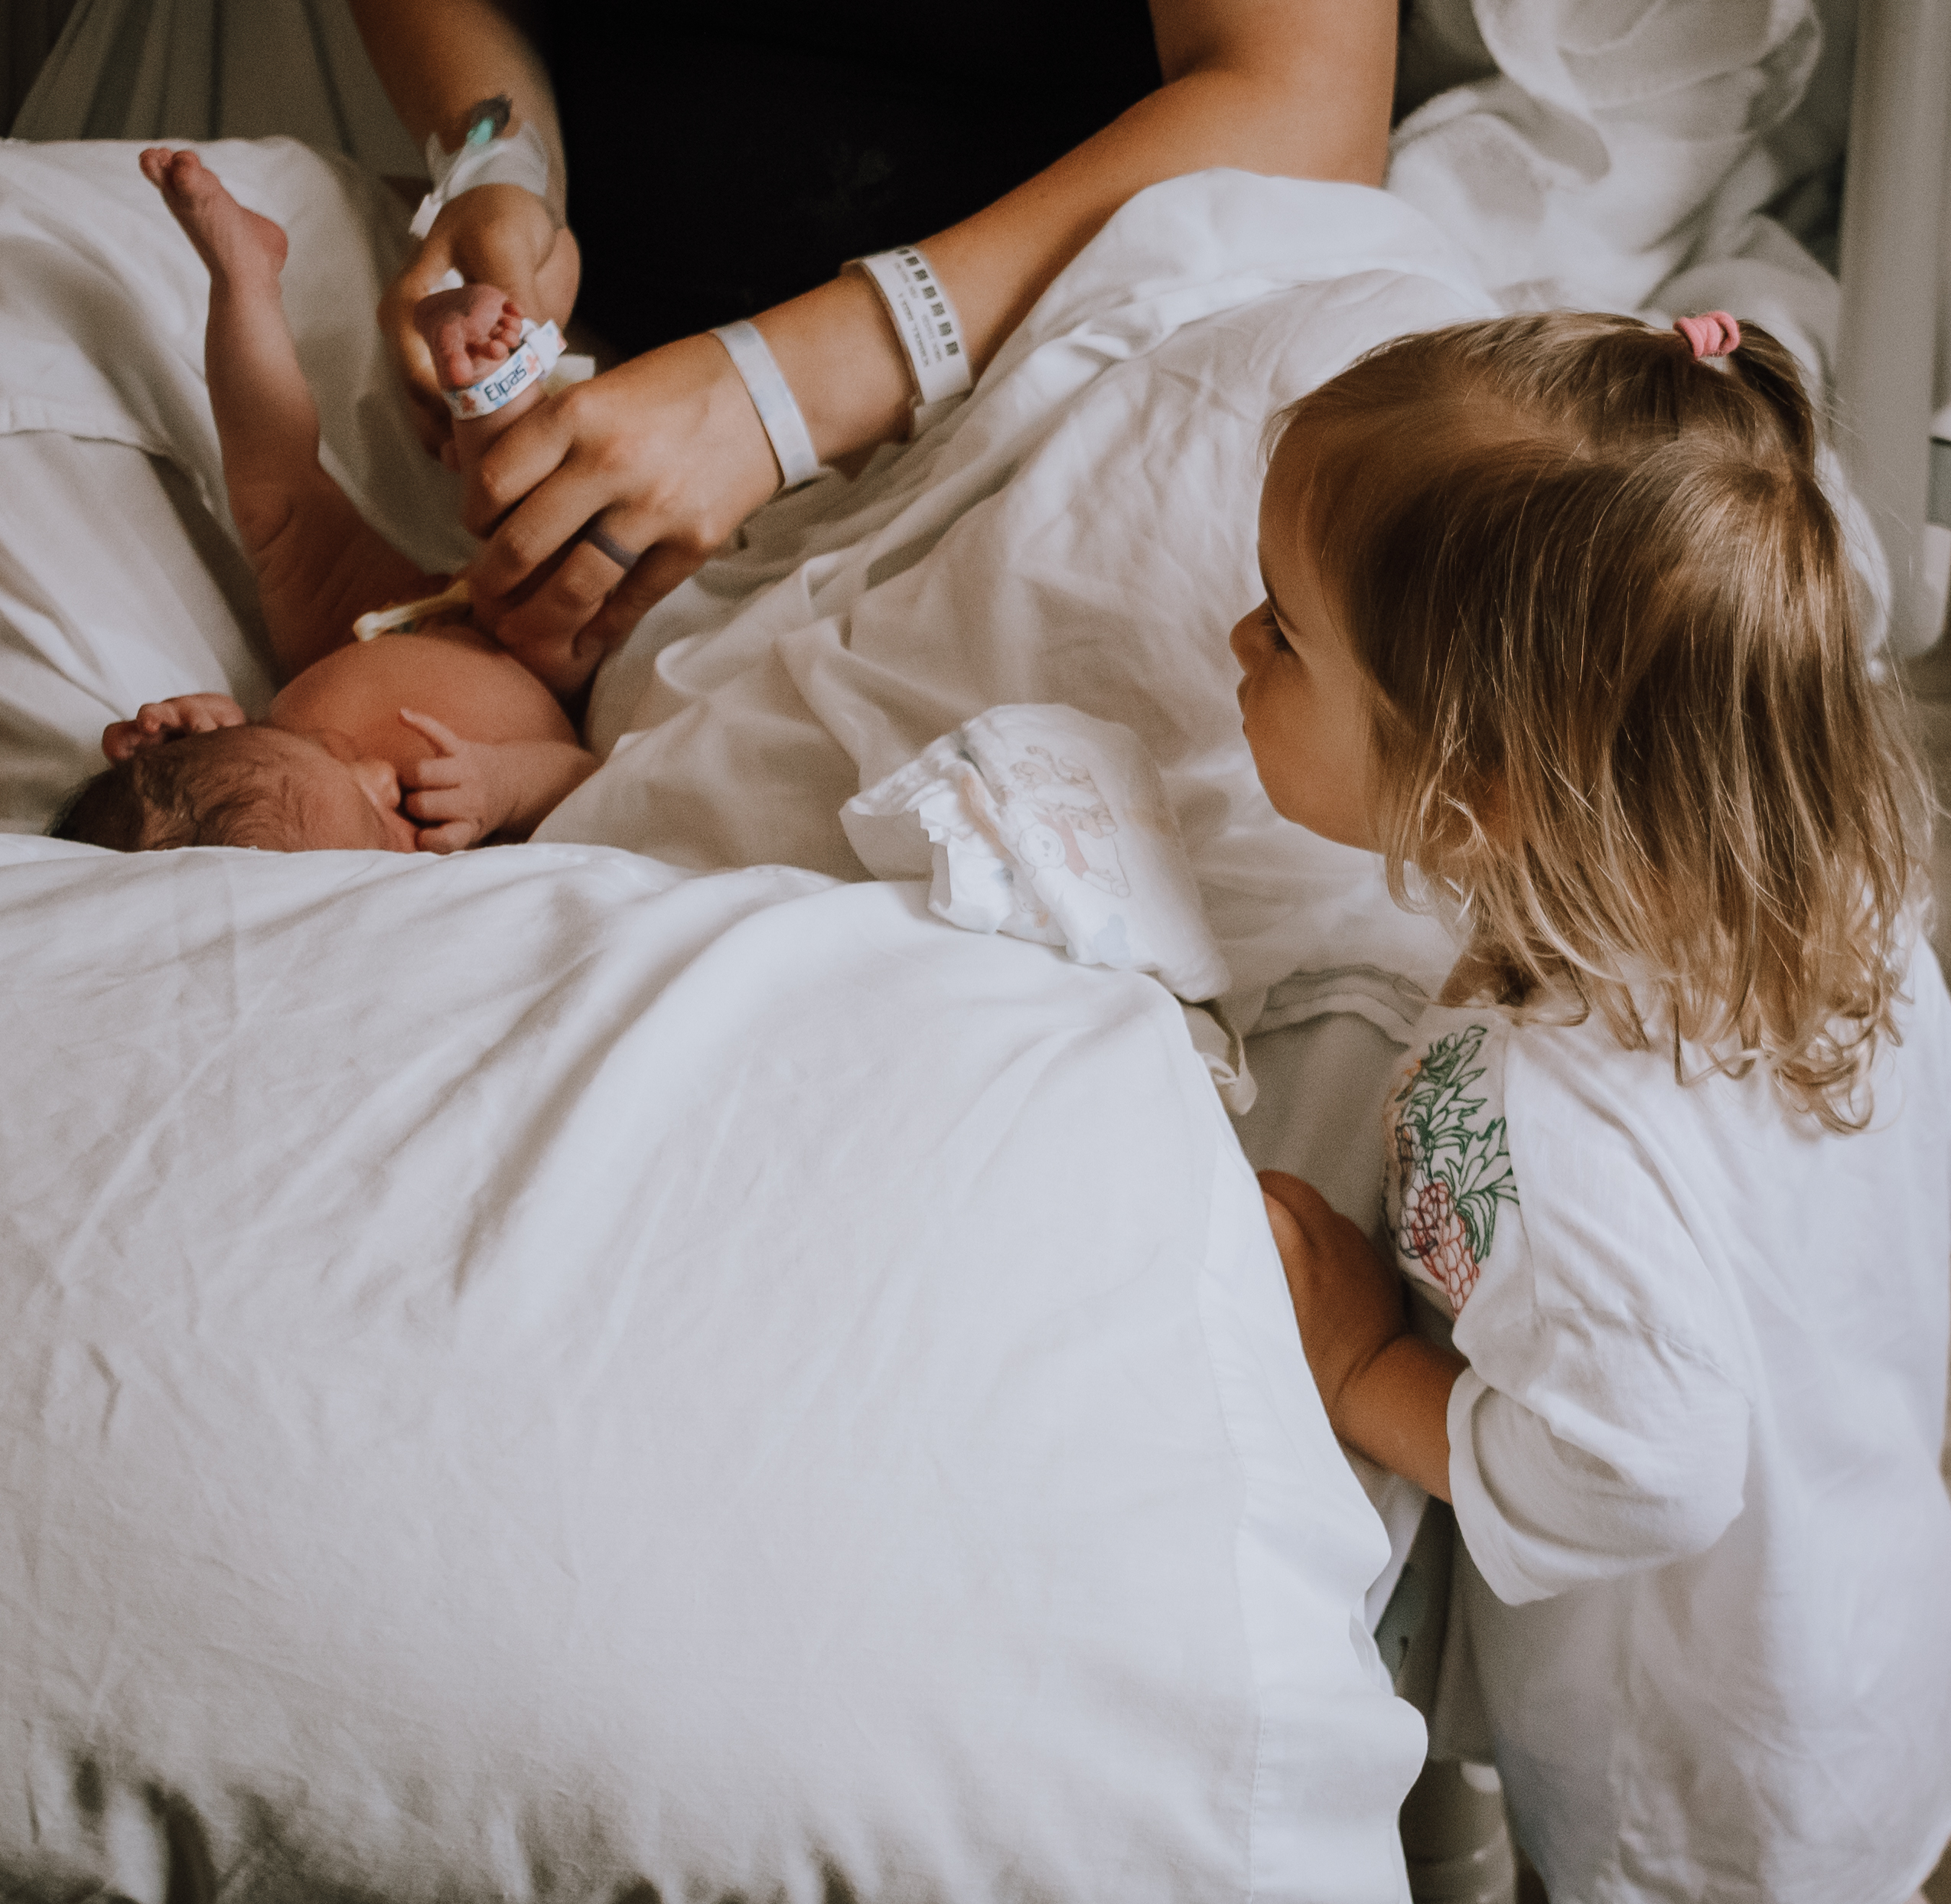 Big toddler sister looks over the hospital bed at newborn baby sister while postpartum mom changes baby during Fresh 48